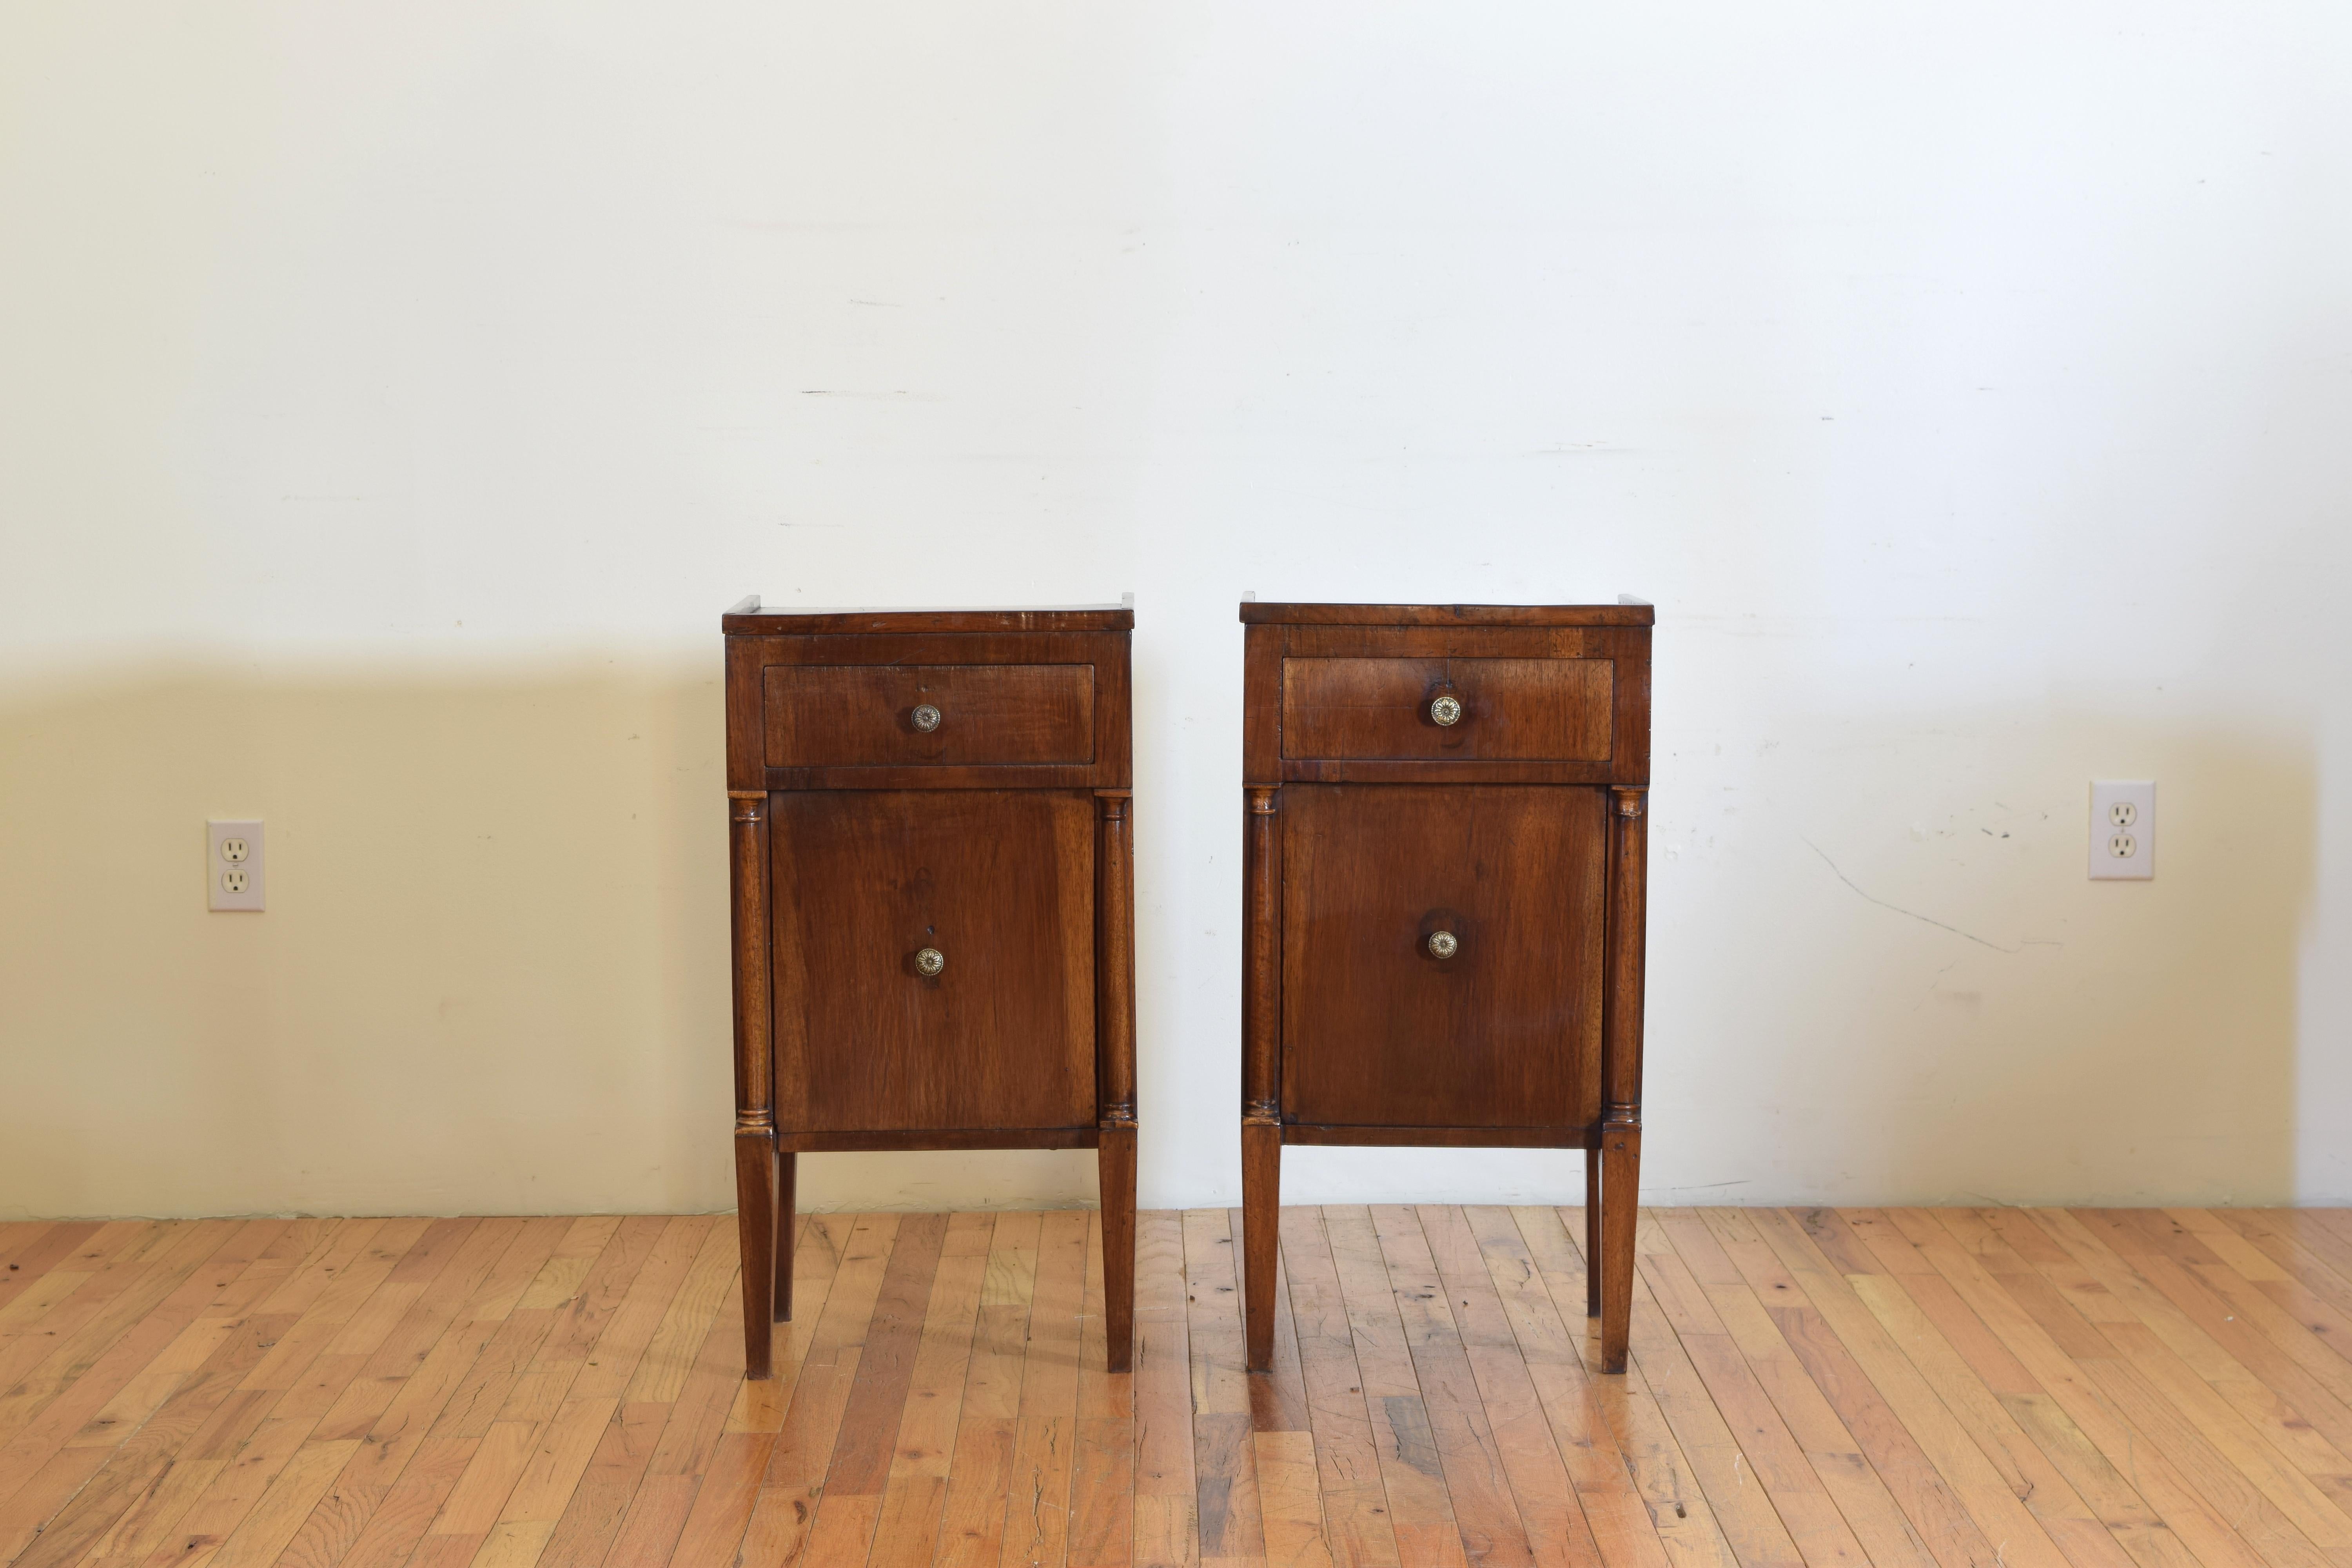 Early 19th Century Pair of Italian Empire Period Walnut Bedside Cabinets, 19h Century